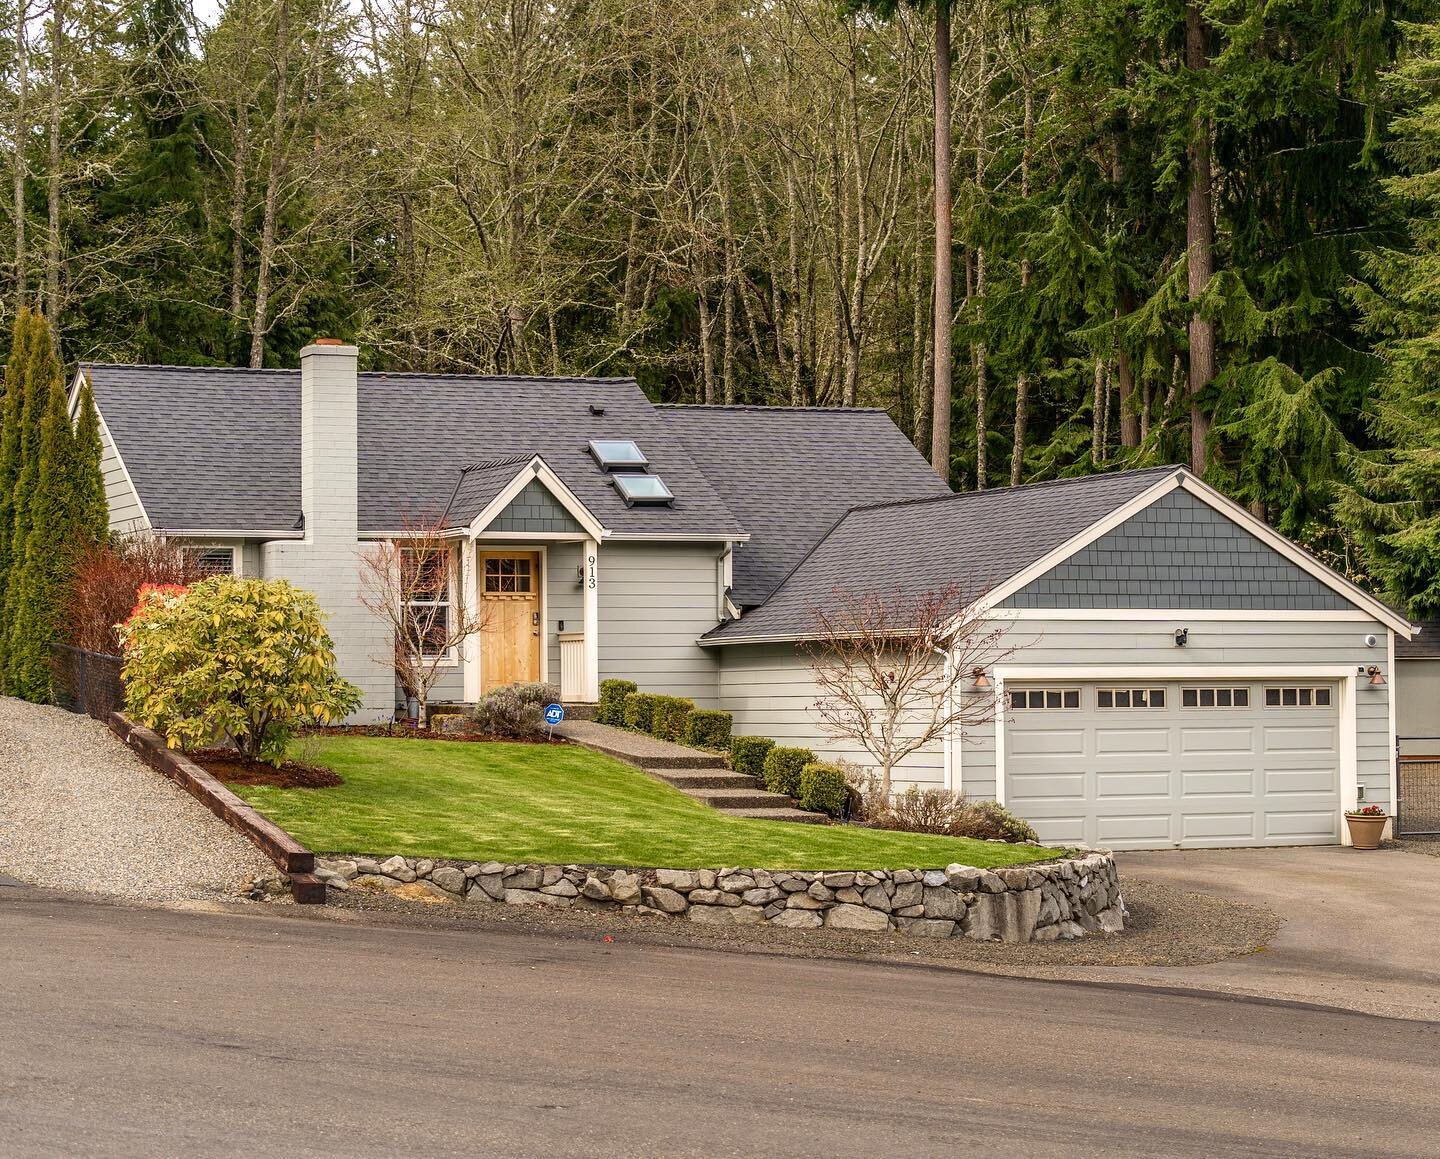 Super cute listing from the folks at @propertiesnw !!

This charming rambler is nestled in a small community of well-maintained homes. Completely updated throughout and is move-in ready with newer siding, roof, windows, ductless heat pumps, doors, cu